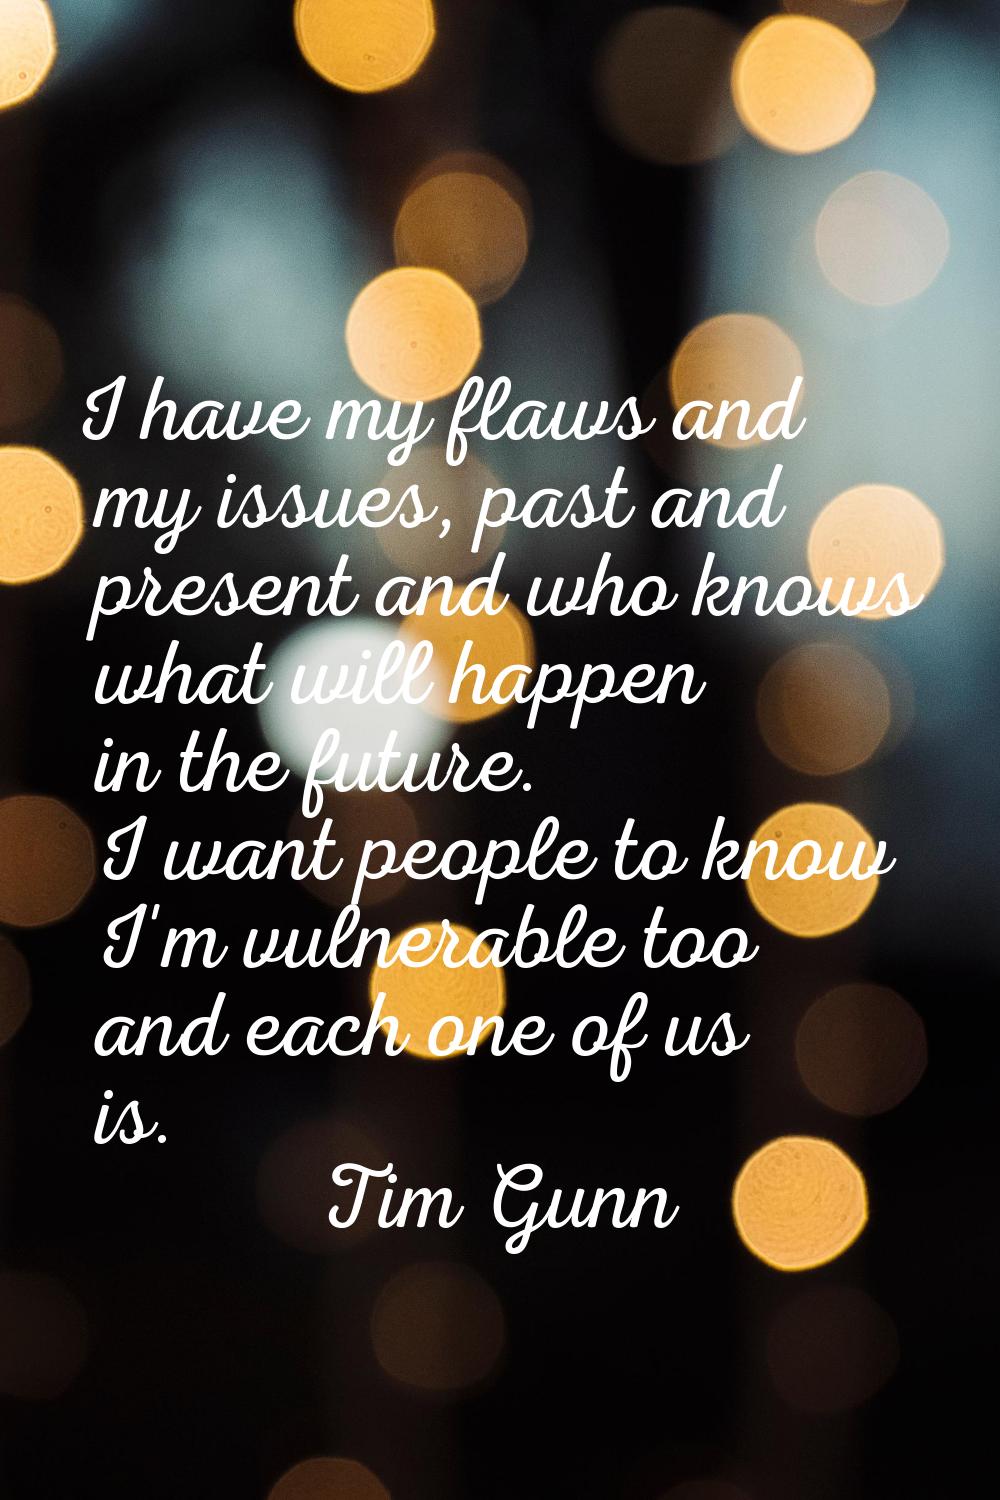 I have my flaws and my issues, past and present and who knows what will happen in the future. I wan